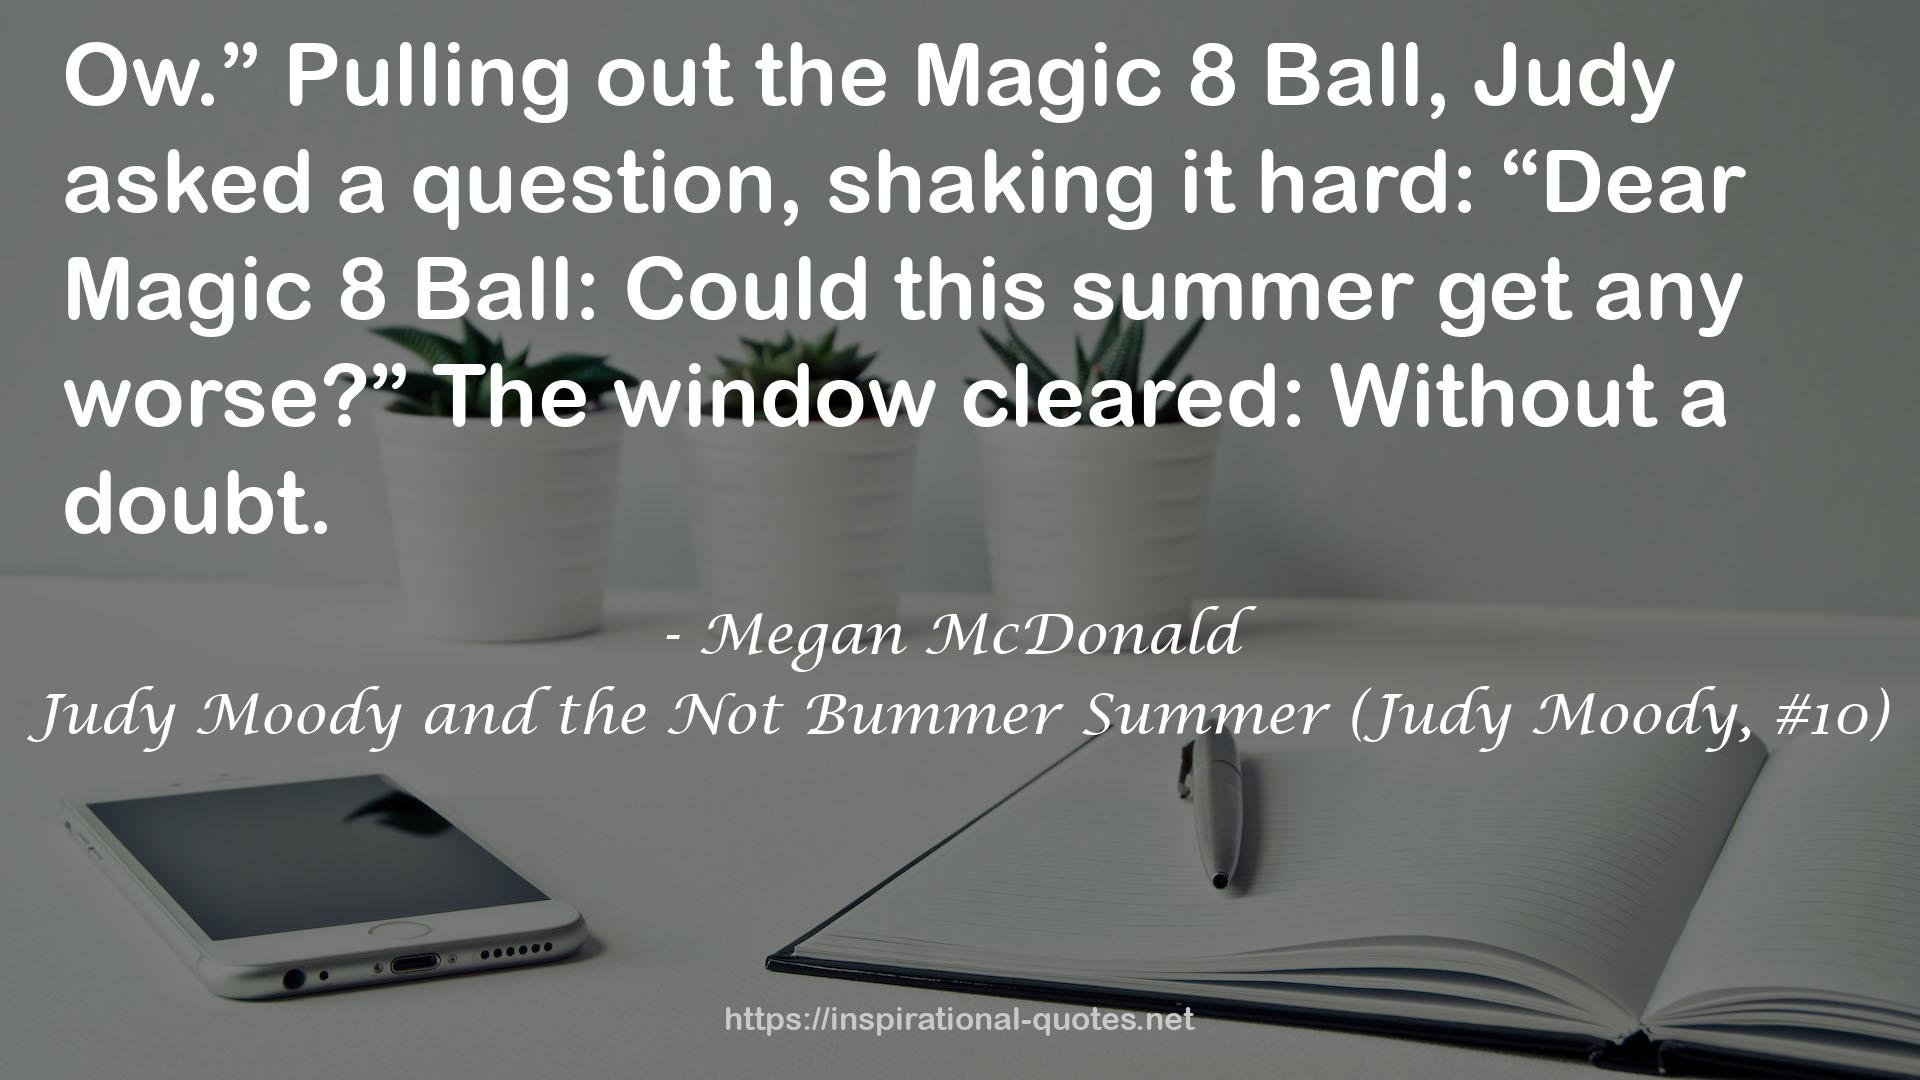 Judy Moody and the Not Bummer Summer (Judy Moody, #10) QUOTES